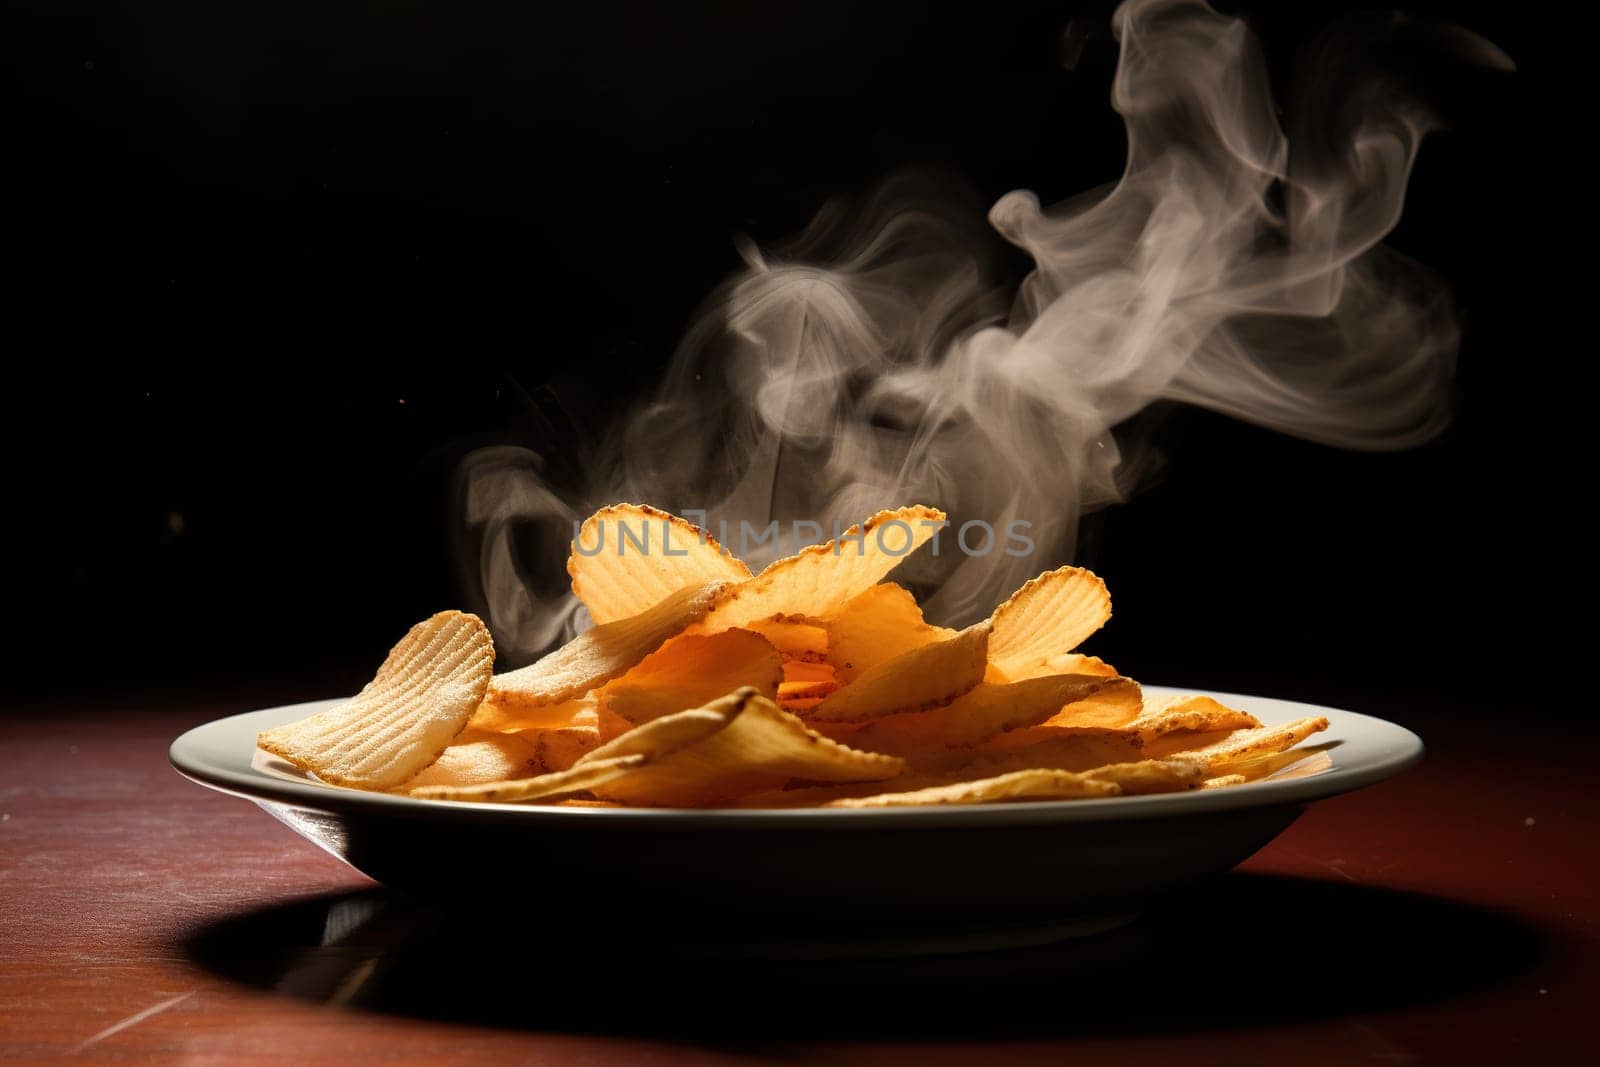 Potato chips in a bowl on a wooden tabletop on a dark background. Generated by artificial intelligence by Vovmar